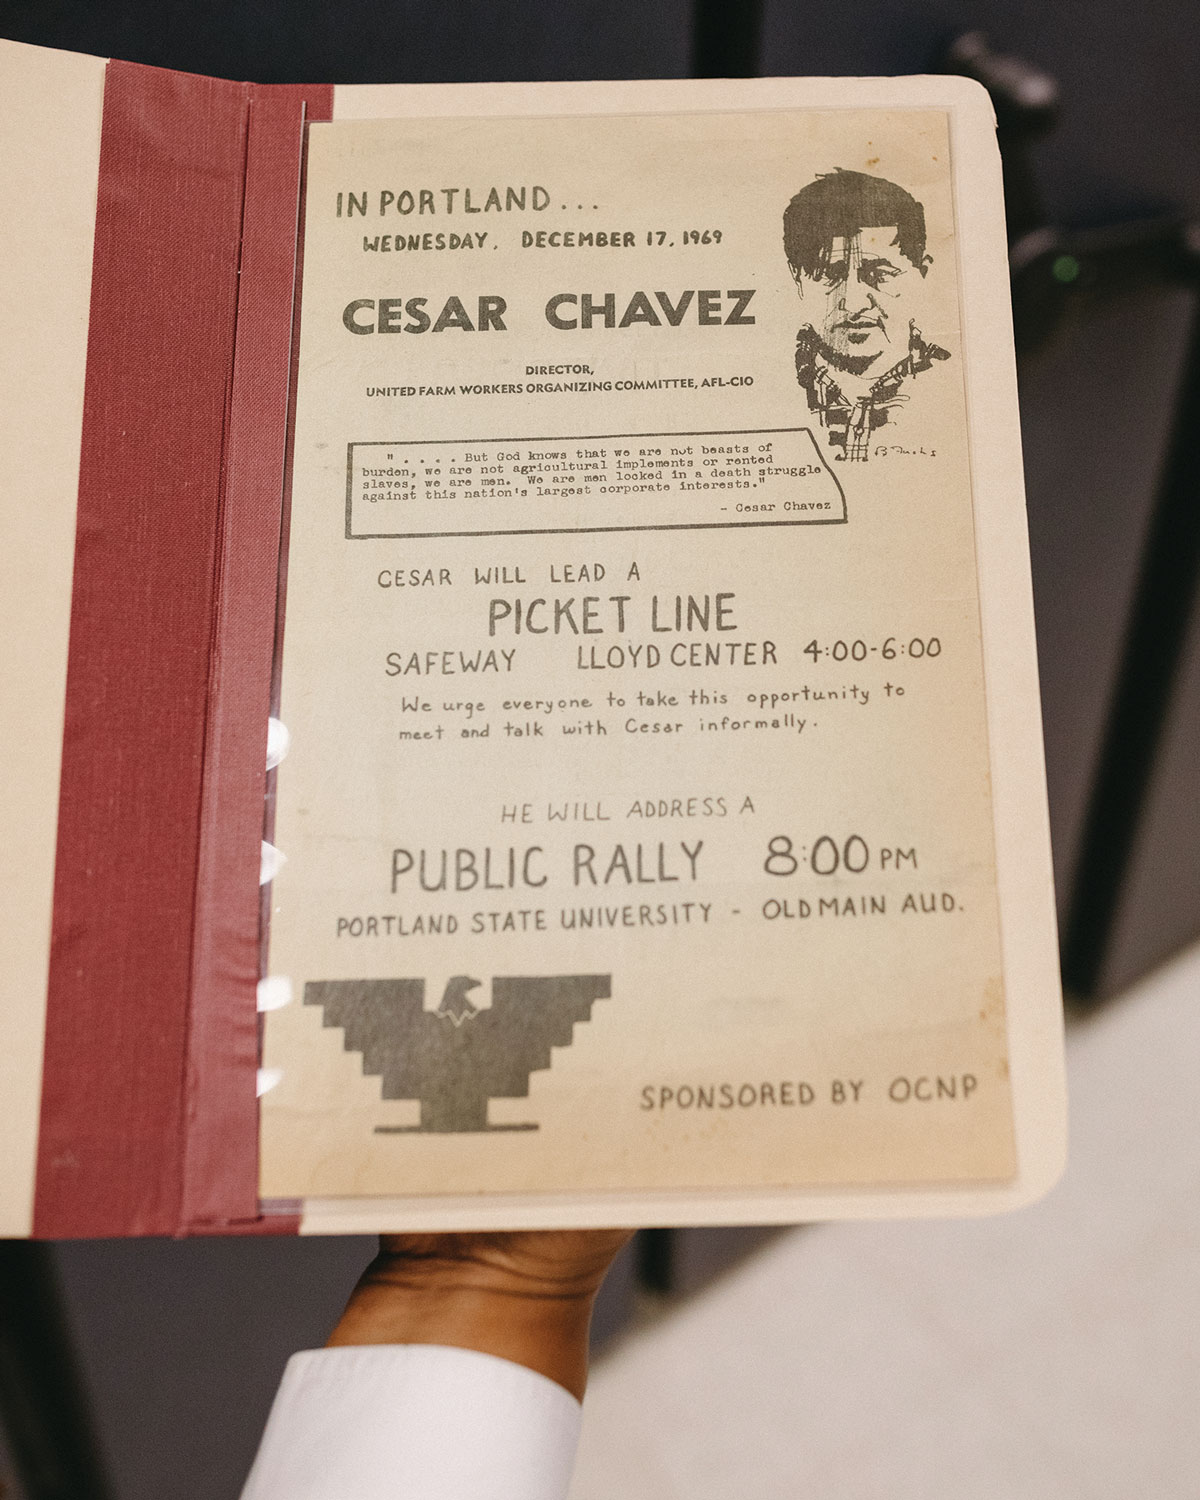 A 1969 broadside announcing a picket line and public rally led by Cesar Chavez of the United Farm Workers.